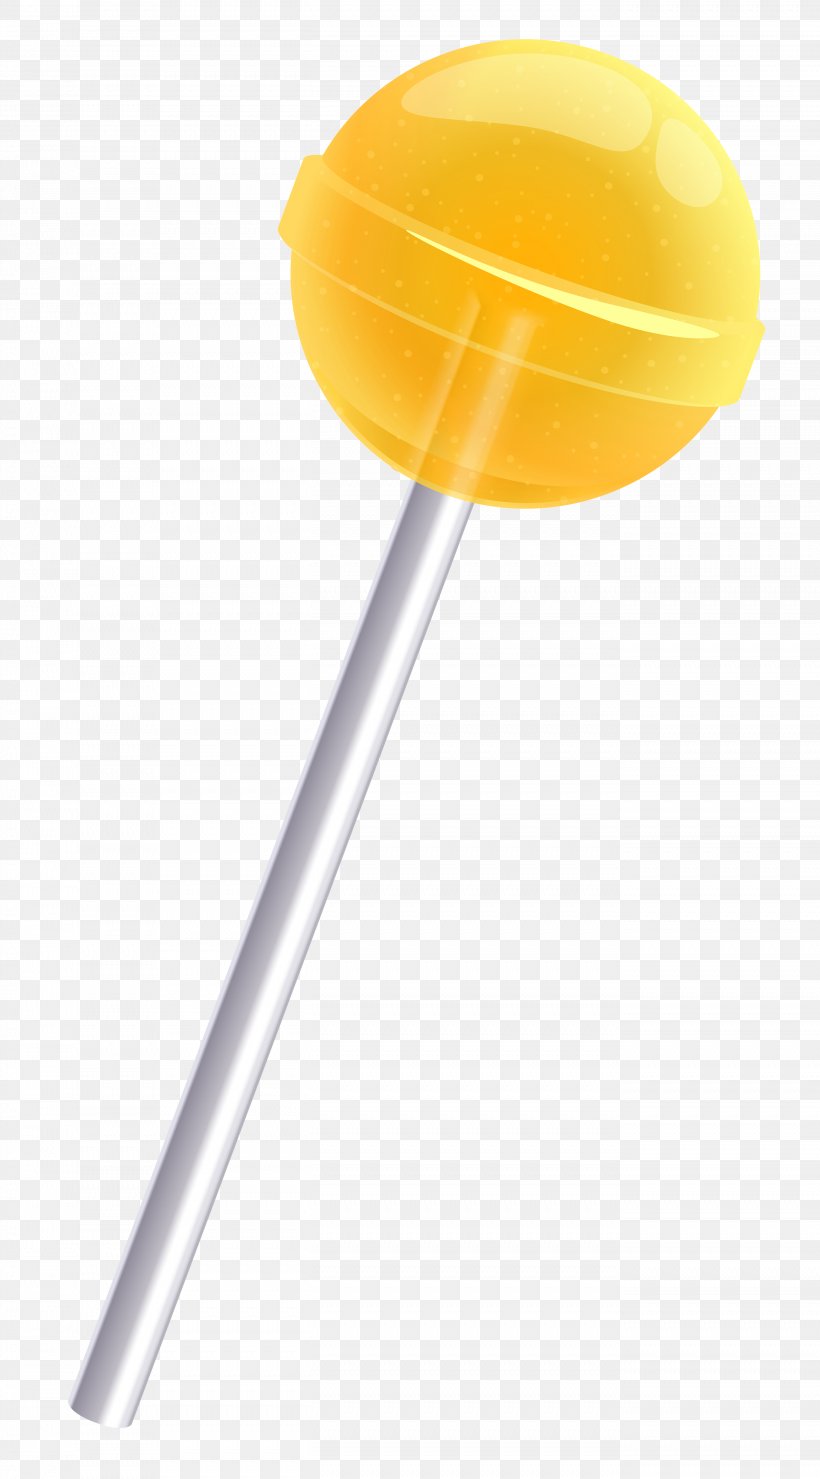 Download Spoon Yellow Design Product Png 2706x4882px Cutlery Lollipop Product Design Spoon Yellow Download Free PSD Mockup Templates